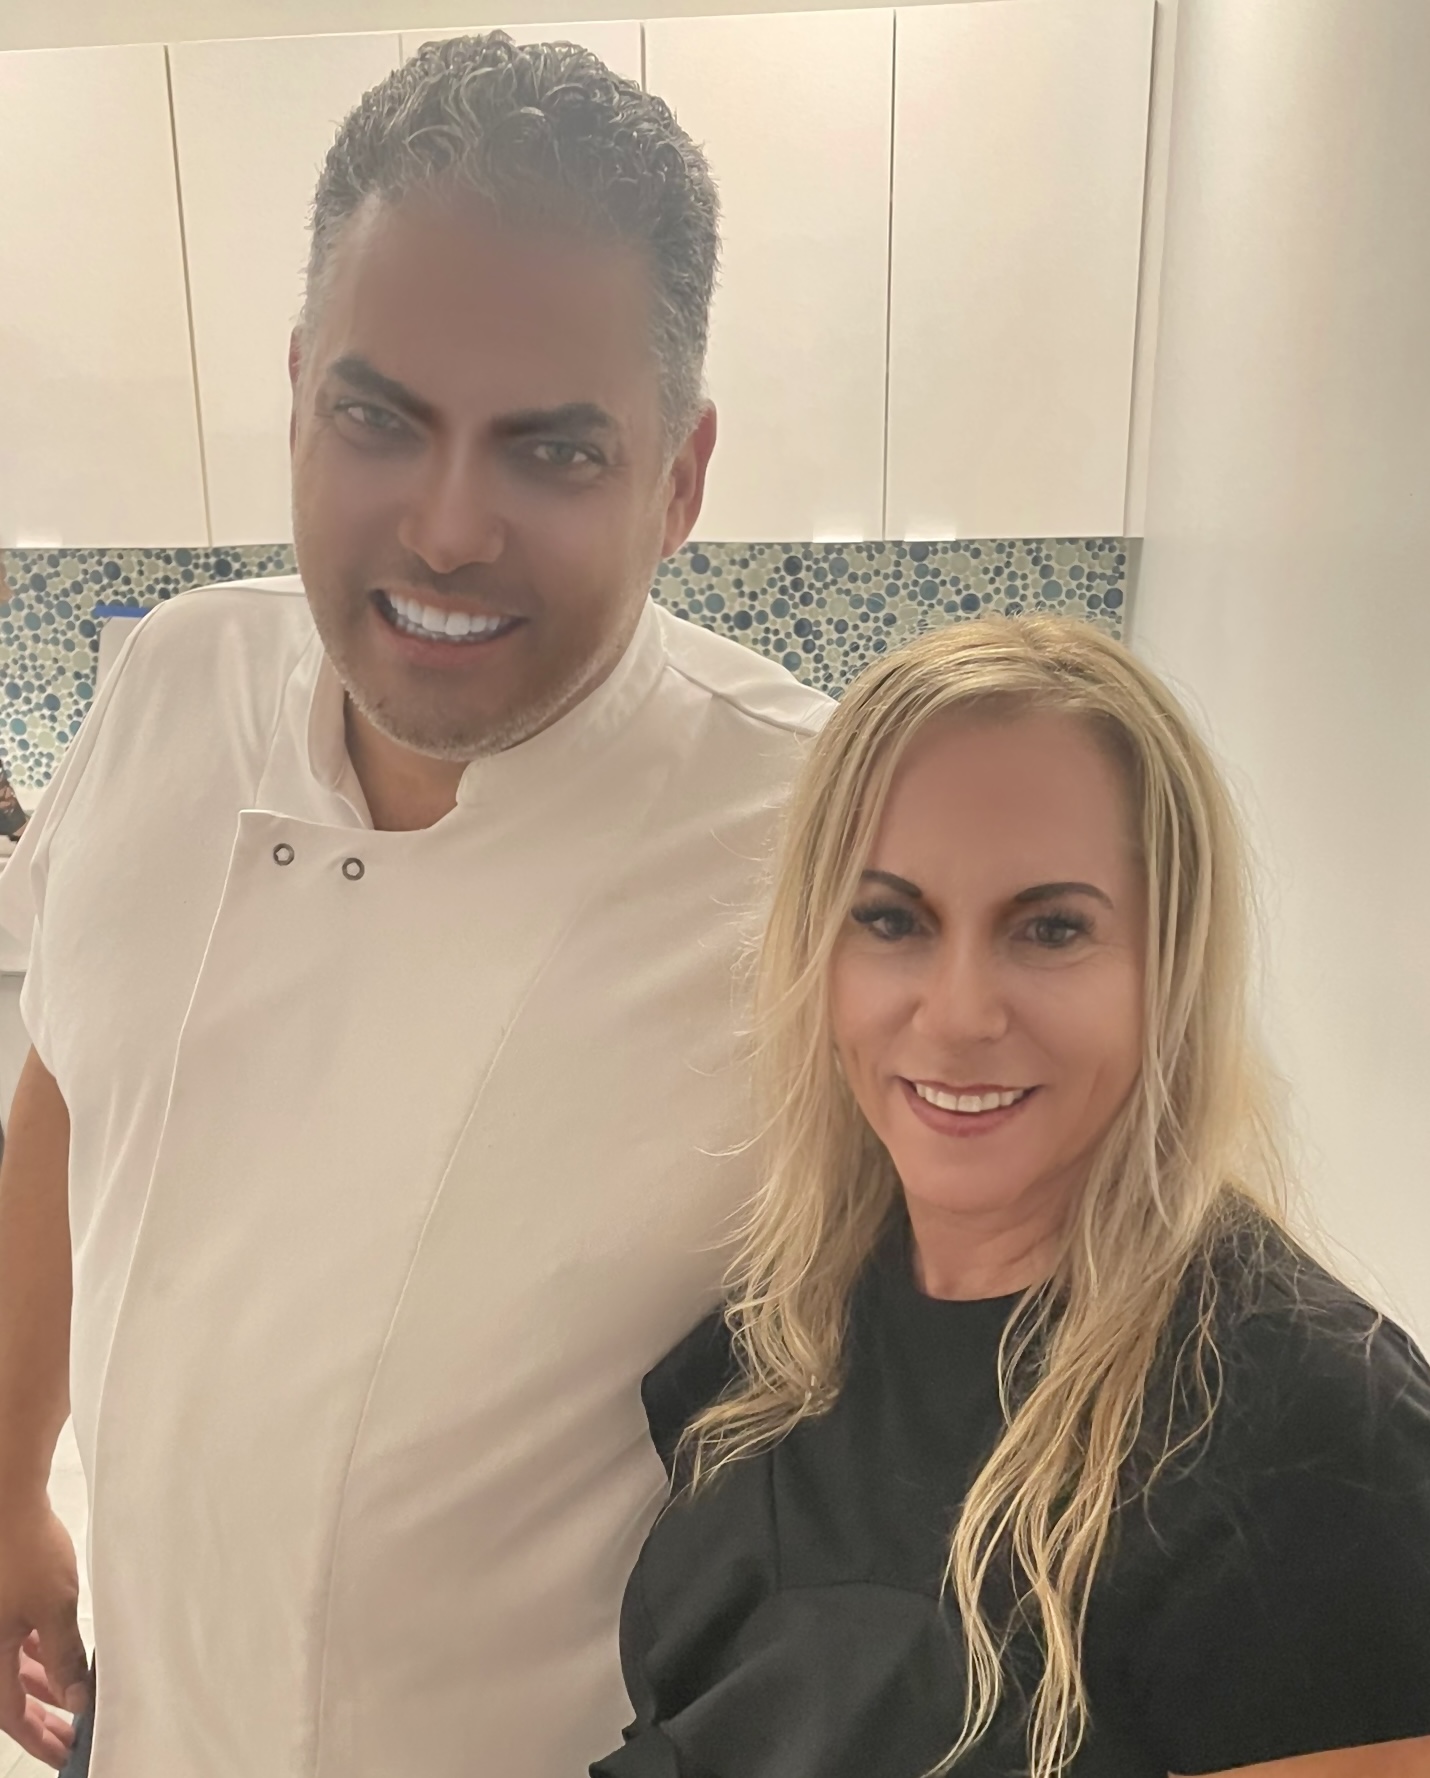 Two people, a man and a woman, smiling and posing together in a kitchen with a mosaic tile backsplash during the Grand Opening. The man has gray hair and wears a white shirt; the woman